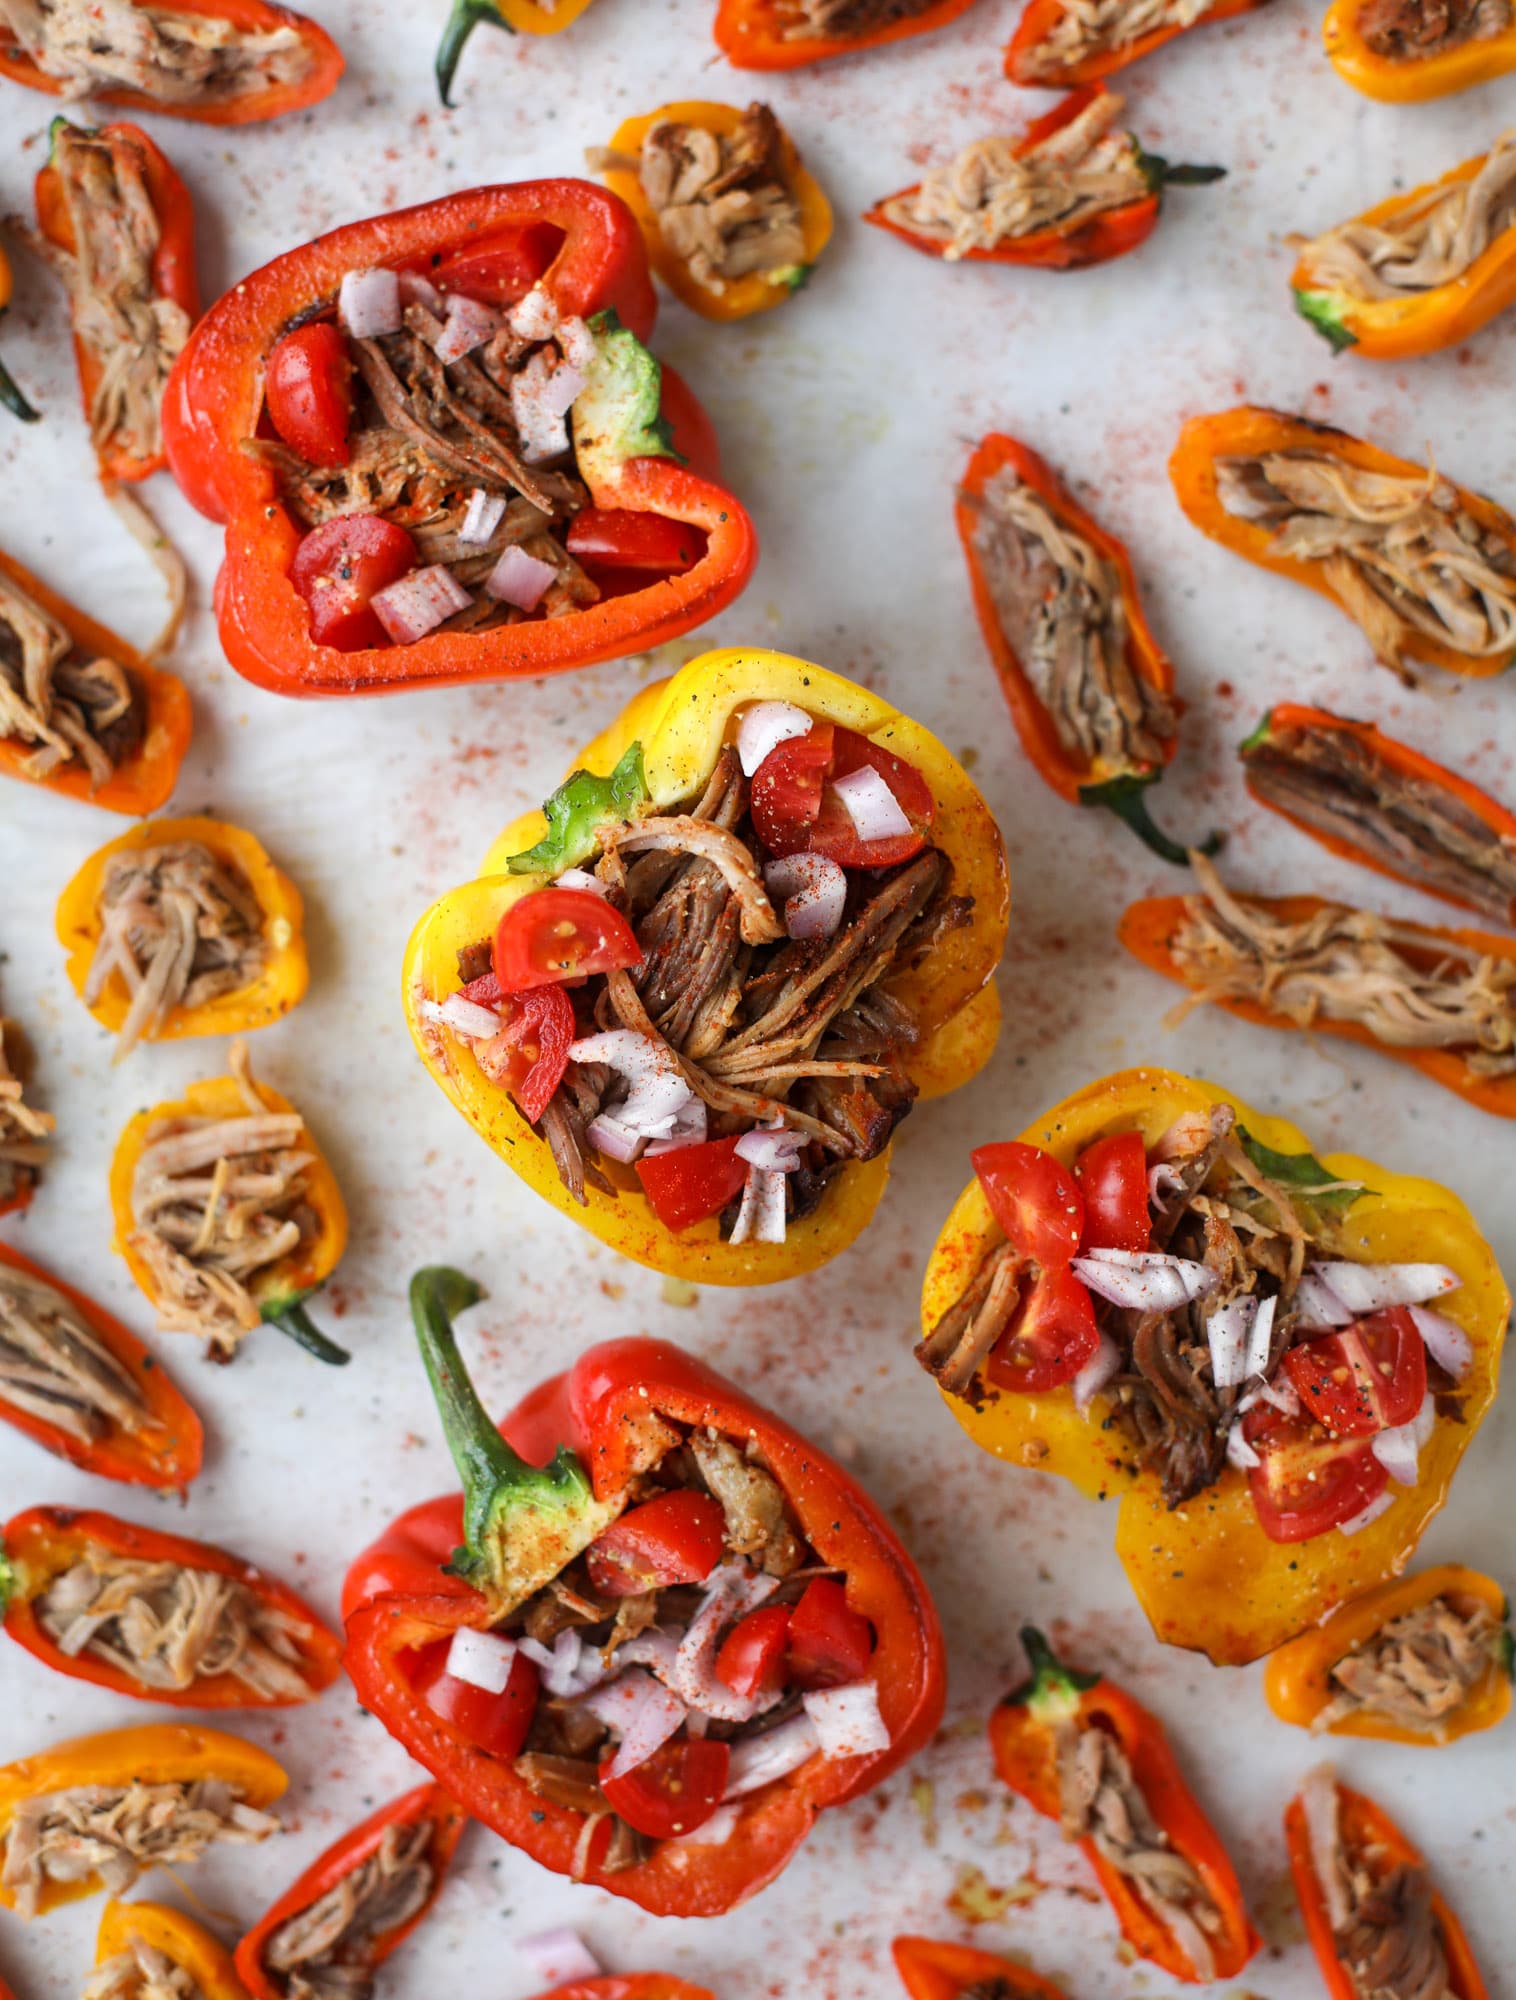 These pulled pork stuffed peppers are a delicious dinner idea for any weeknight! They work great with leftover pulled pork and the filling is totally customizable. They are flavorful, come together quickly and always a crowd pleaser! I howsweeteats.com #pulledpork #stuffedpeppers